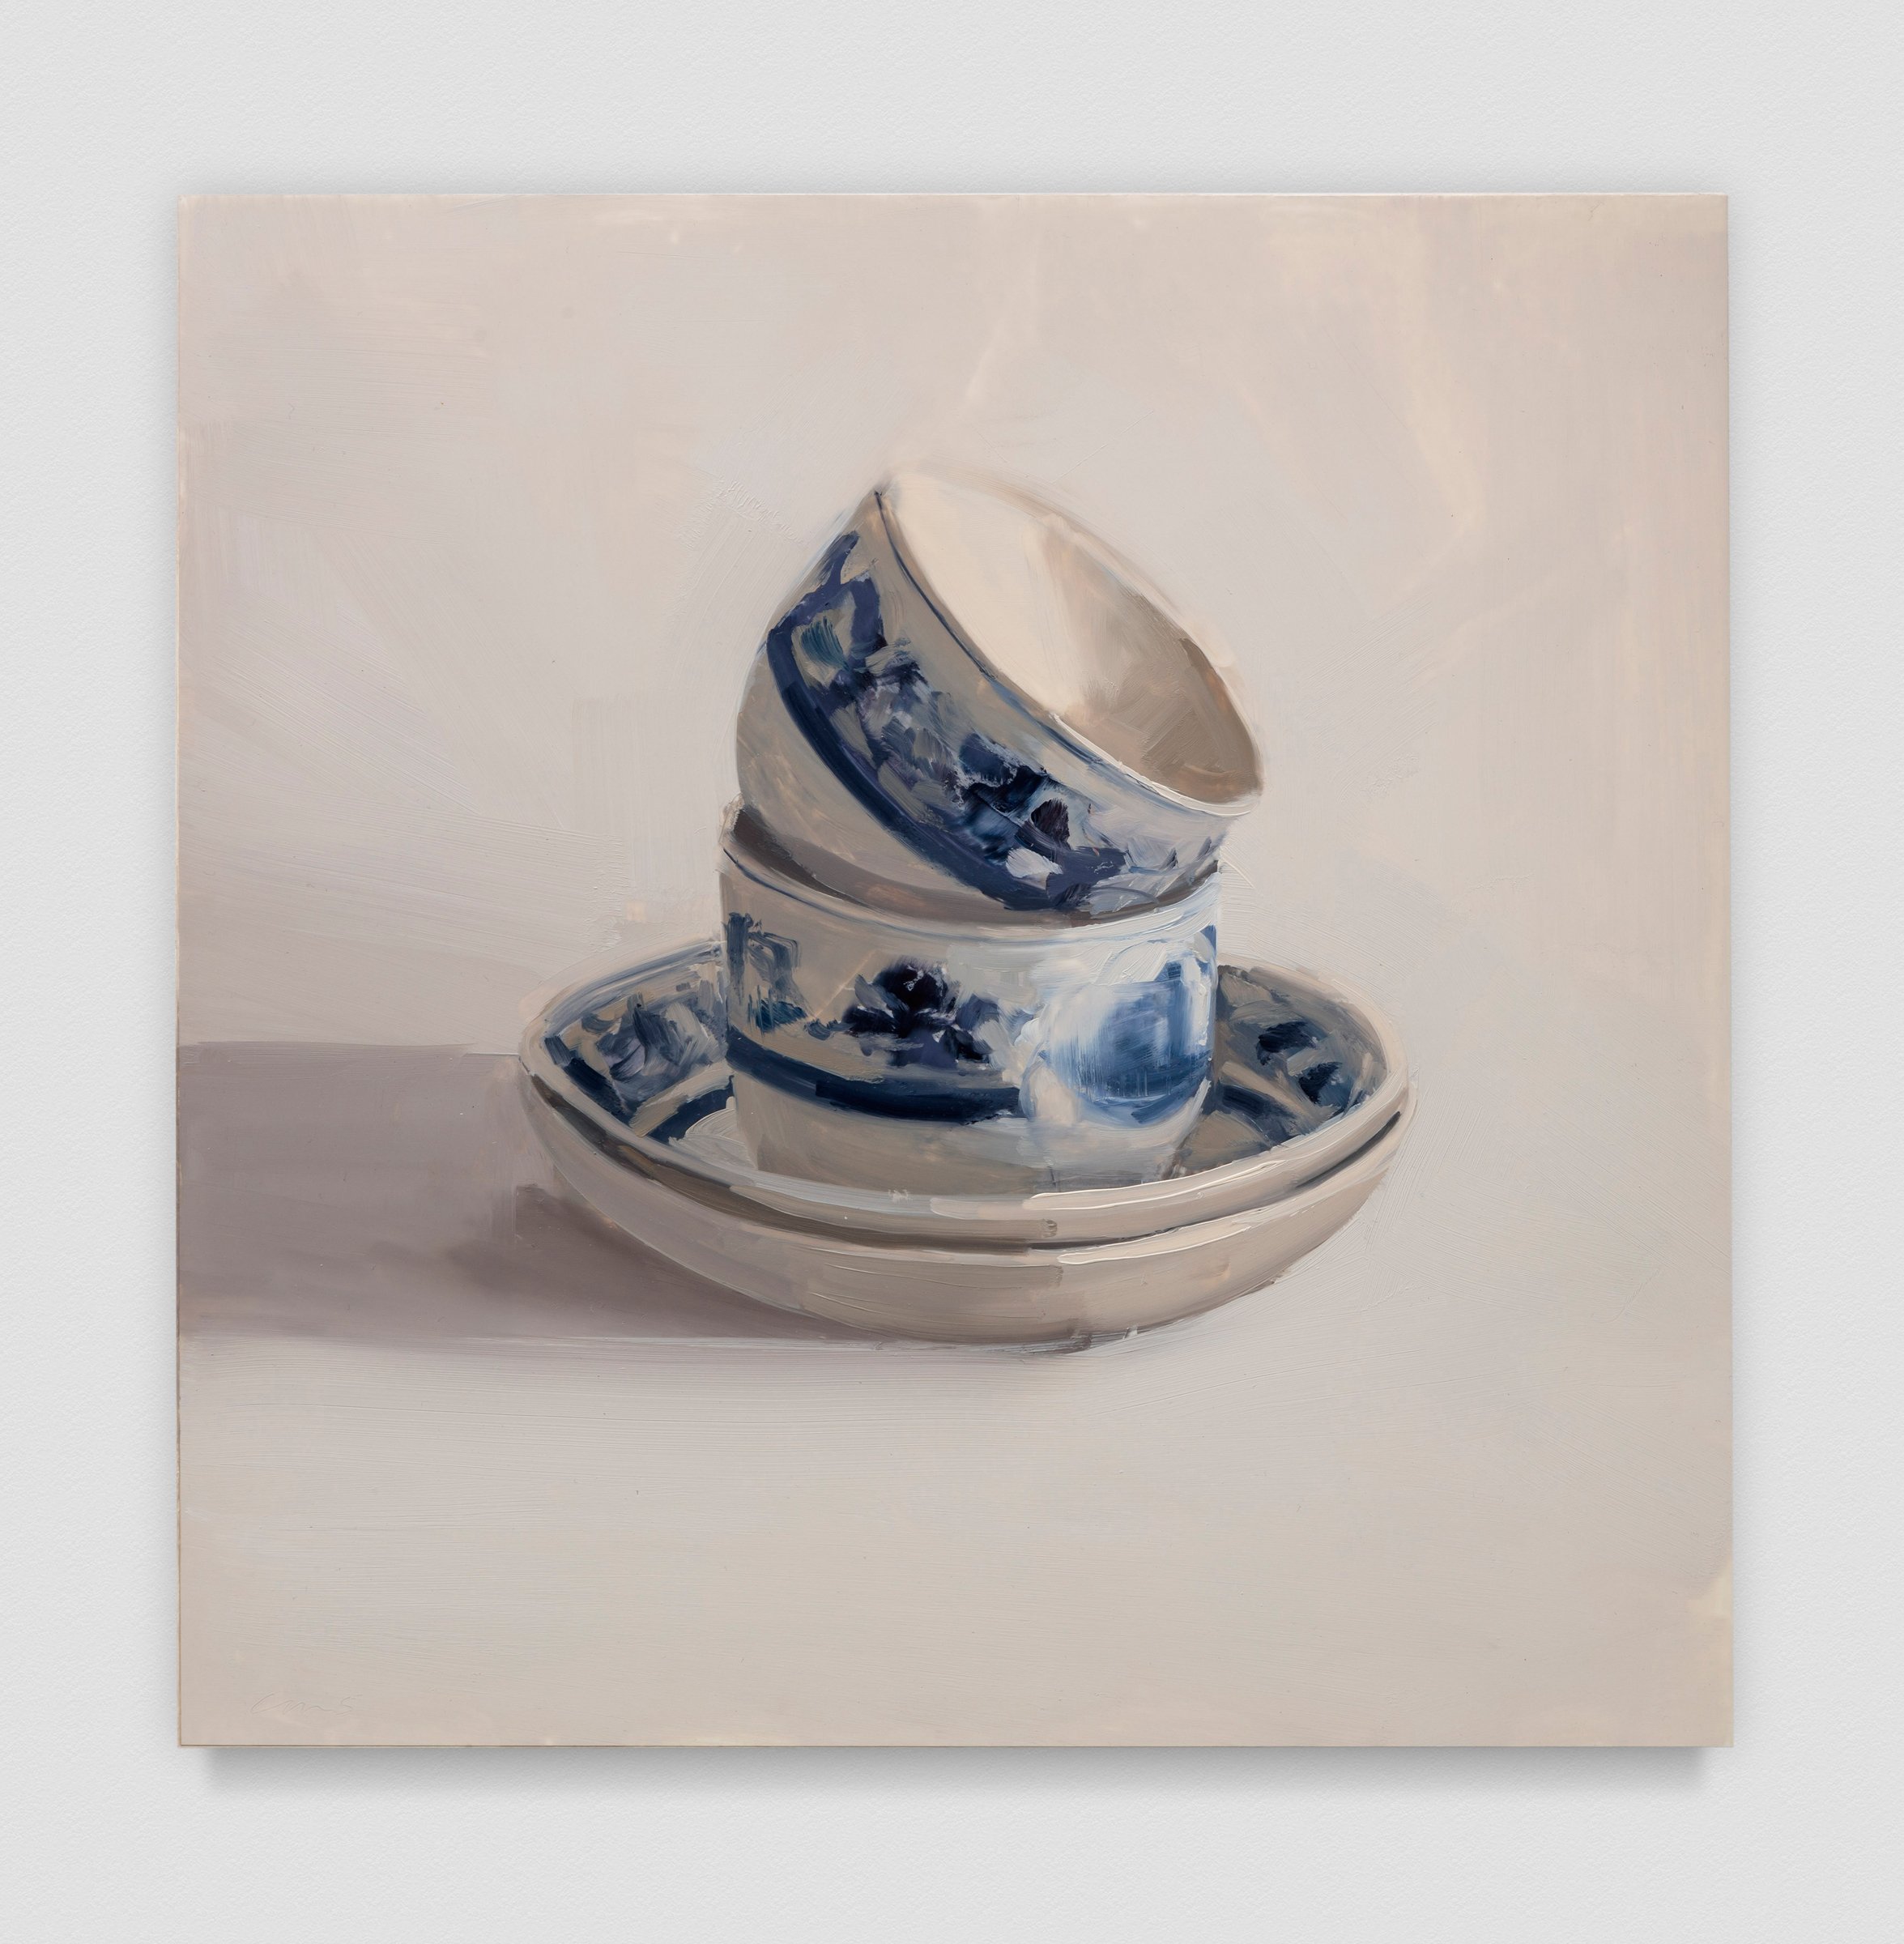  Carrie Mae Smith                                                                                                   Two Blue and White Bouillon Cups and Saucers                                                                                          